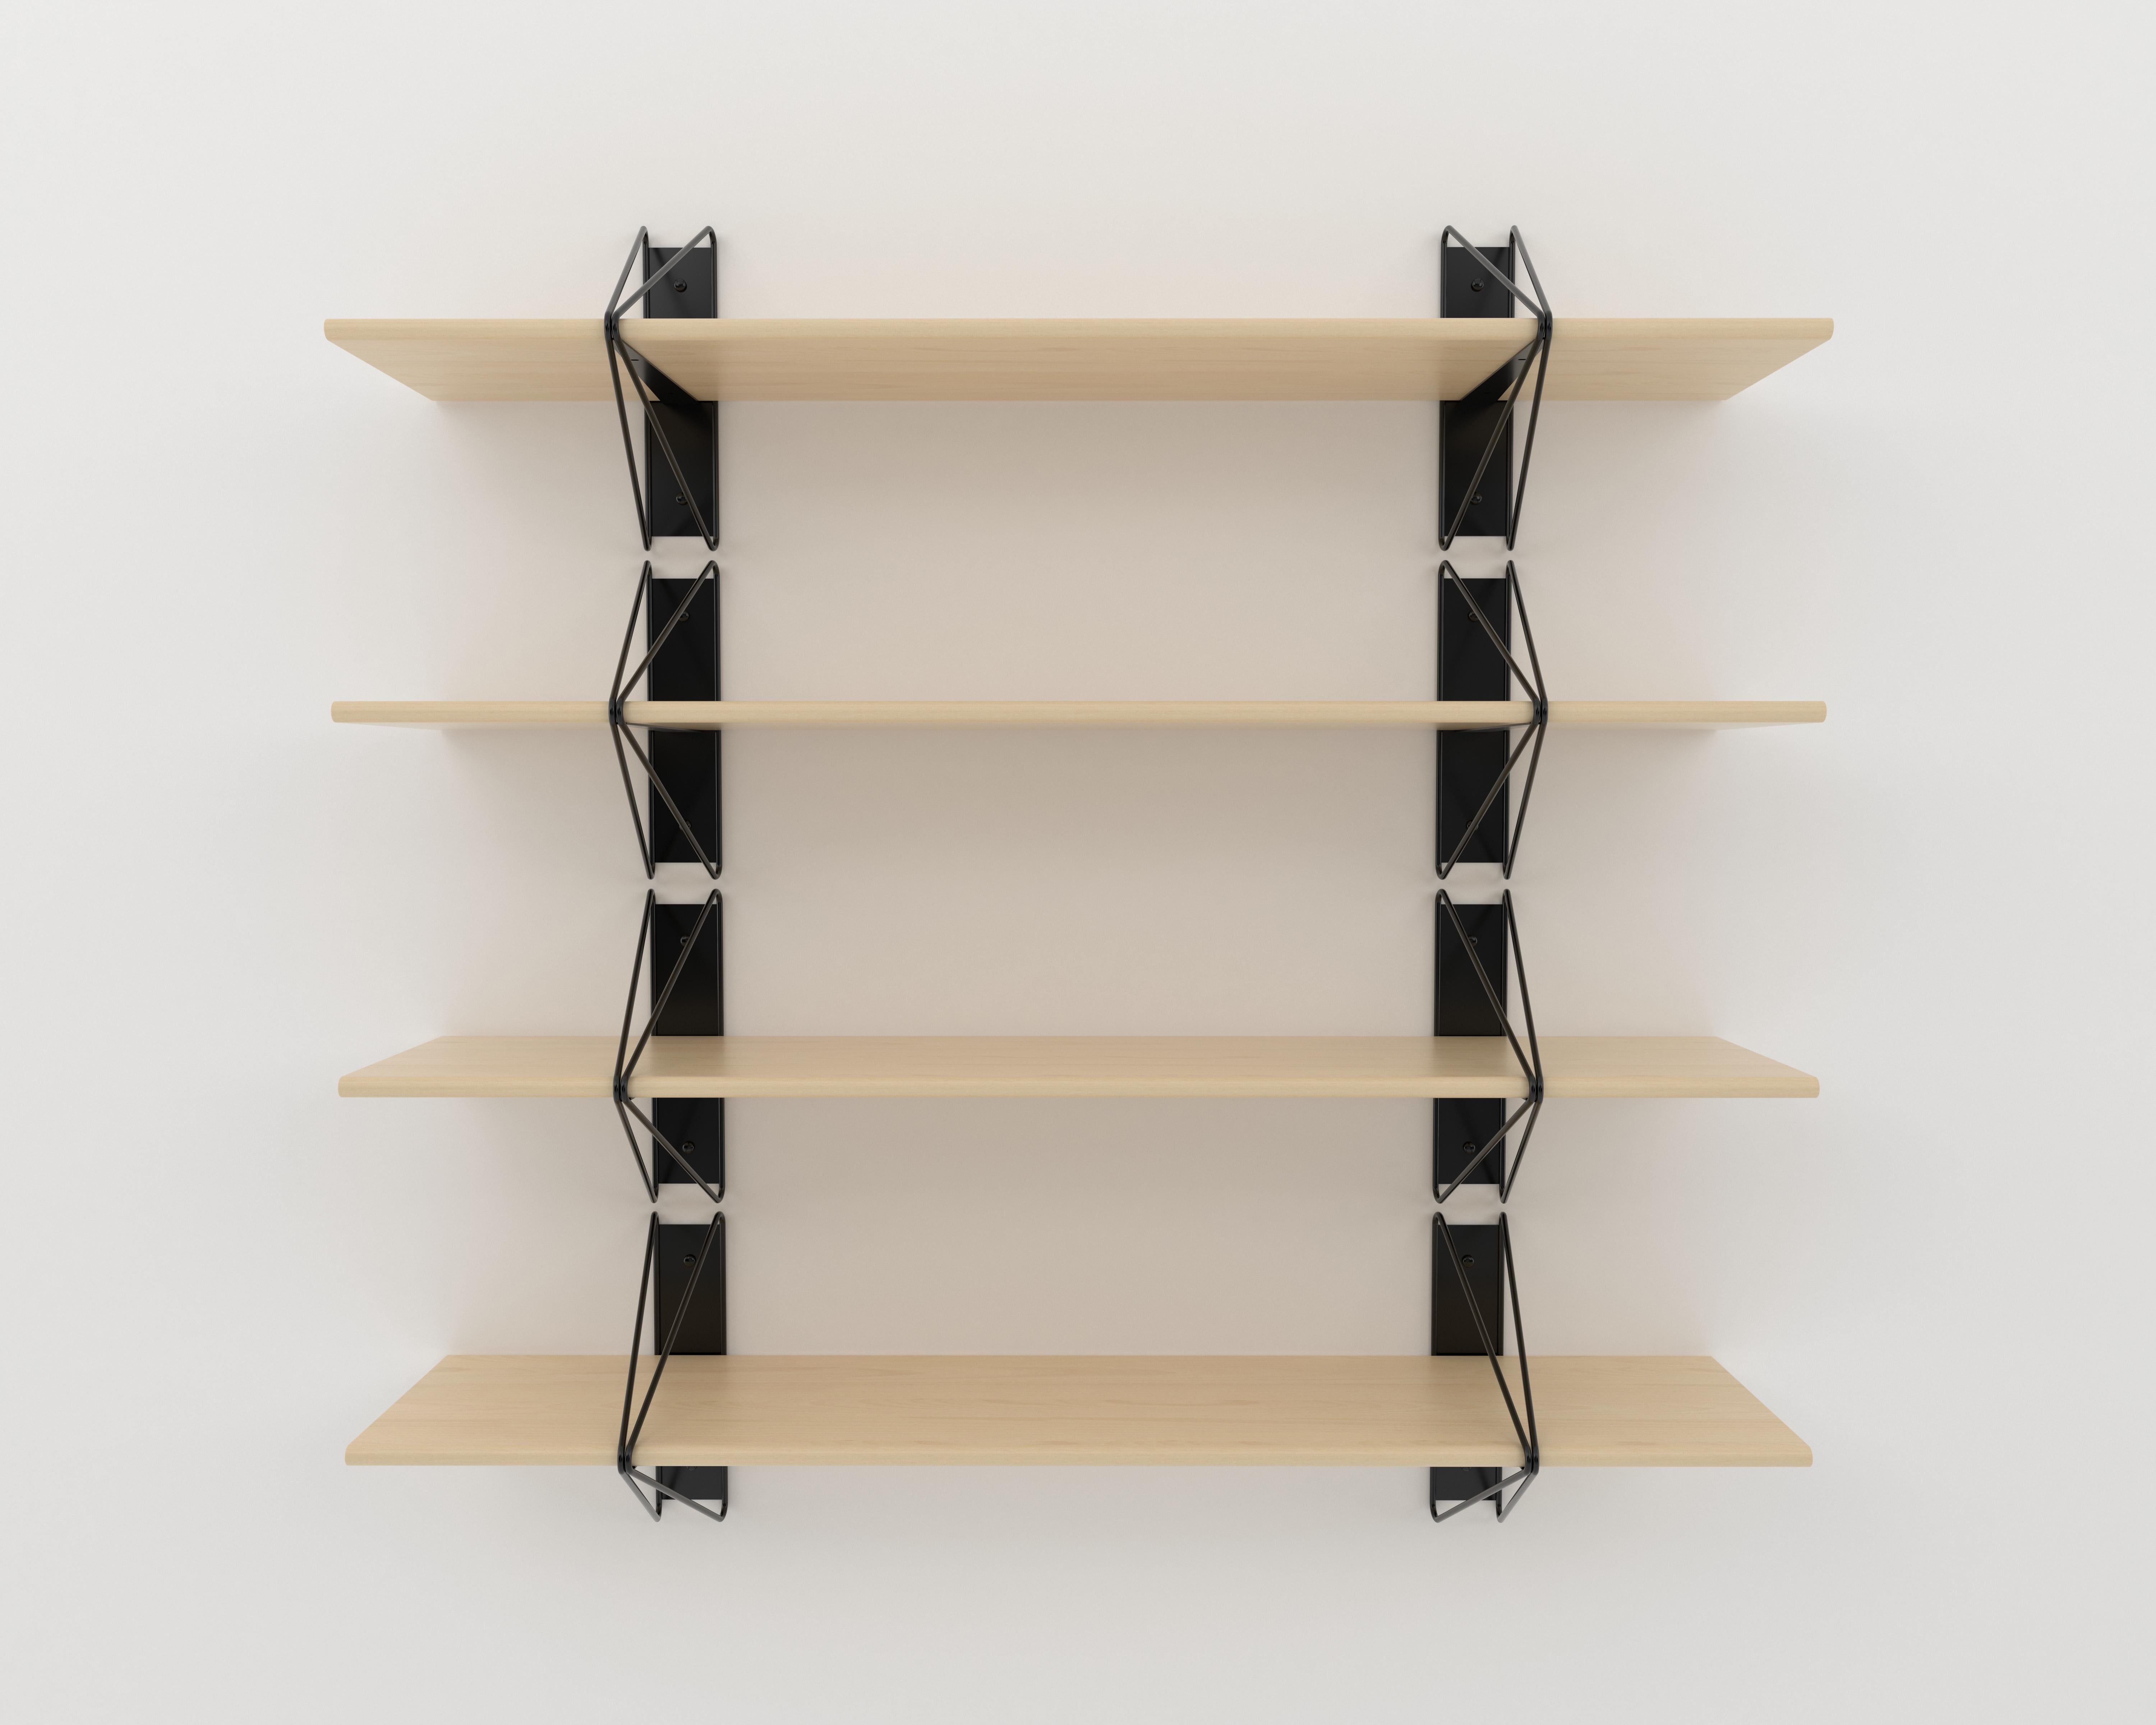 American Set of 3 Strut Shelves from Souda, Black and Walnut, Made to Order For Sale